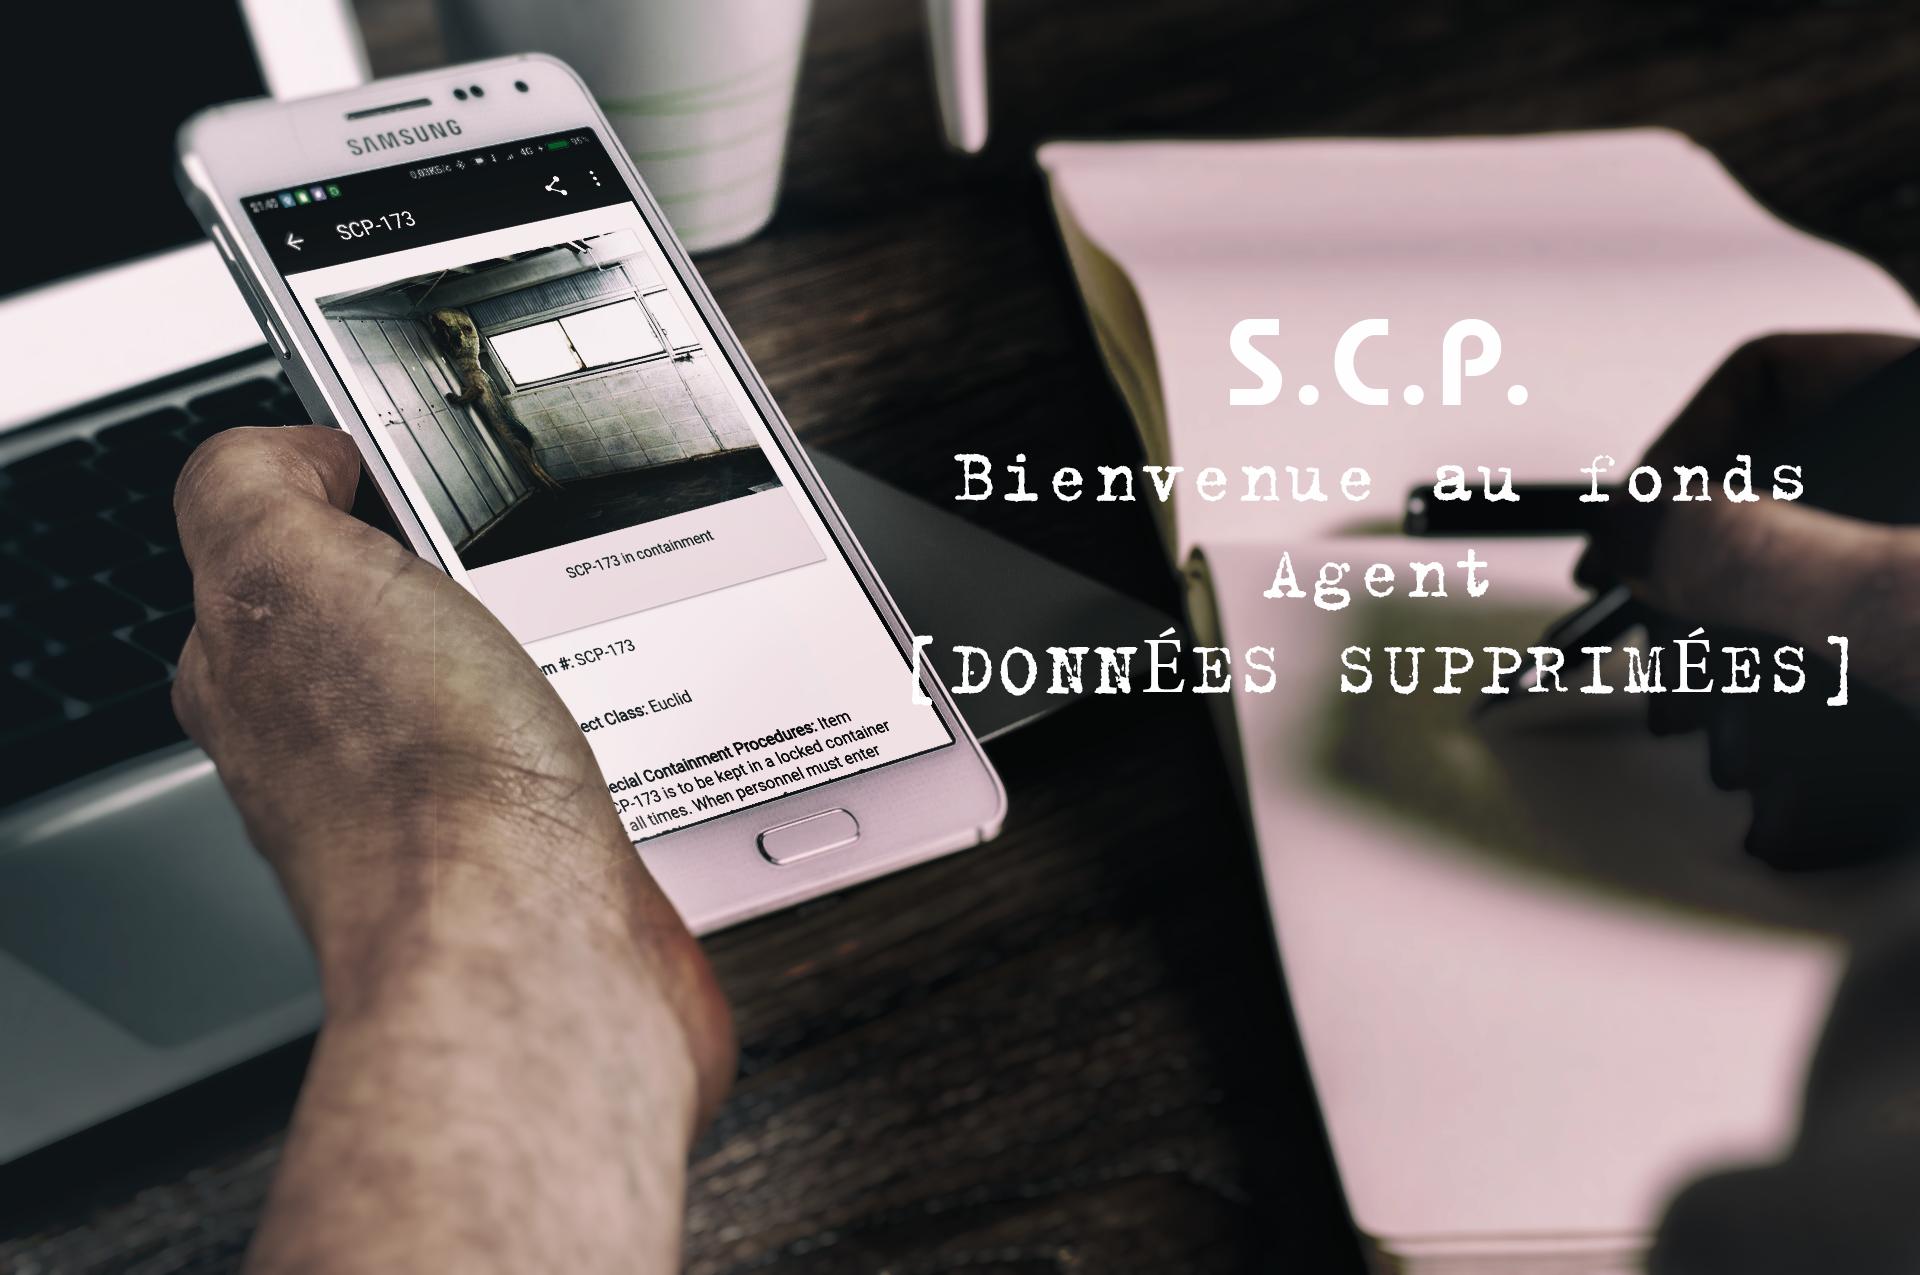 Scp Foundation France On Offline Database Fr For Android Apk Download - scp site 35 roblox update 2019